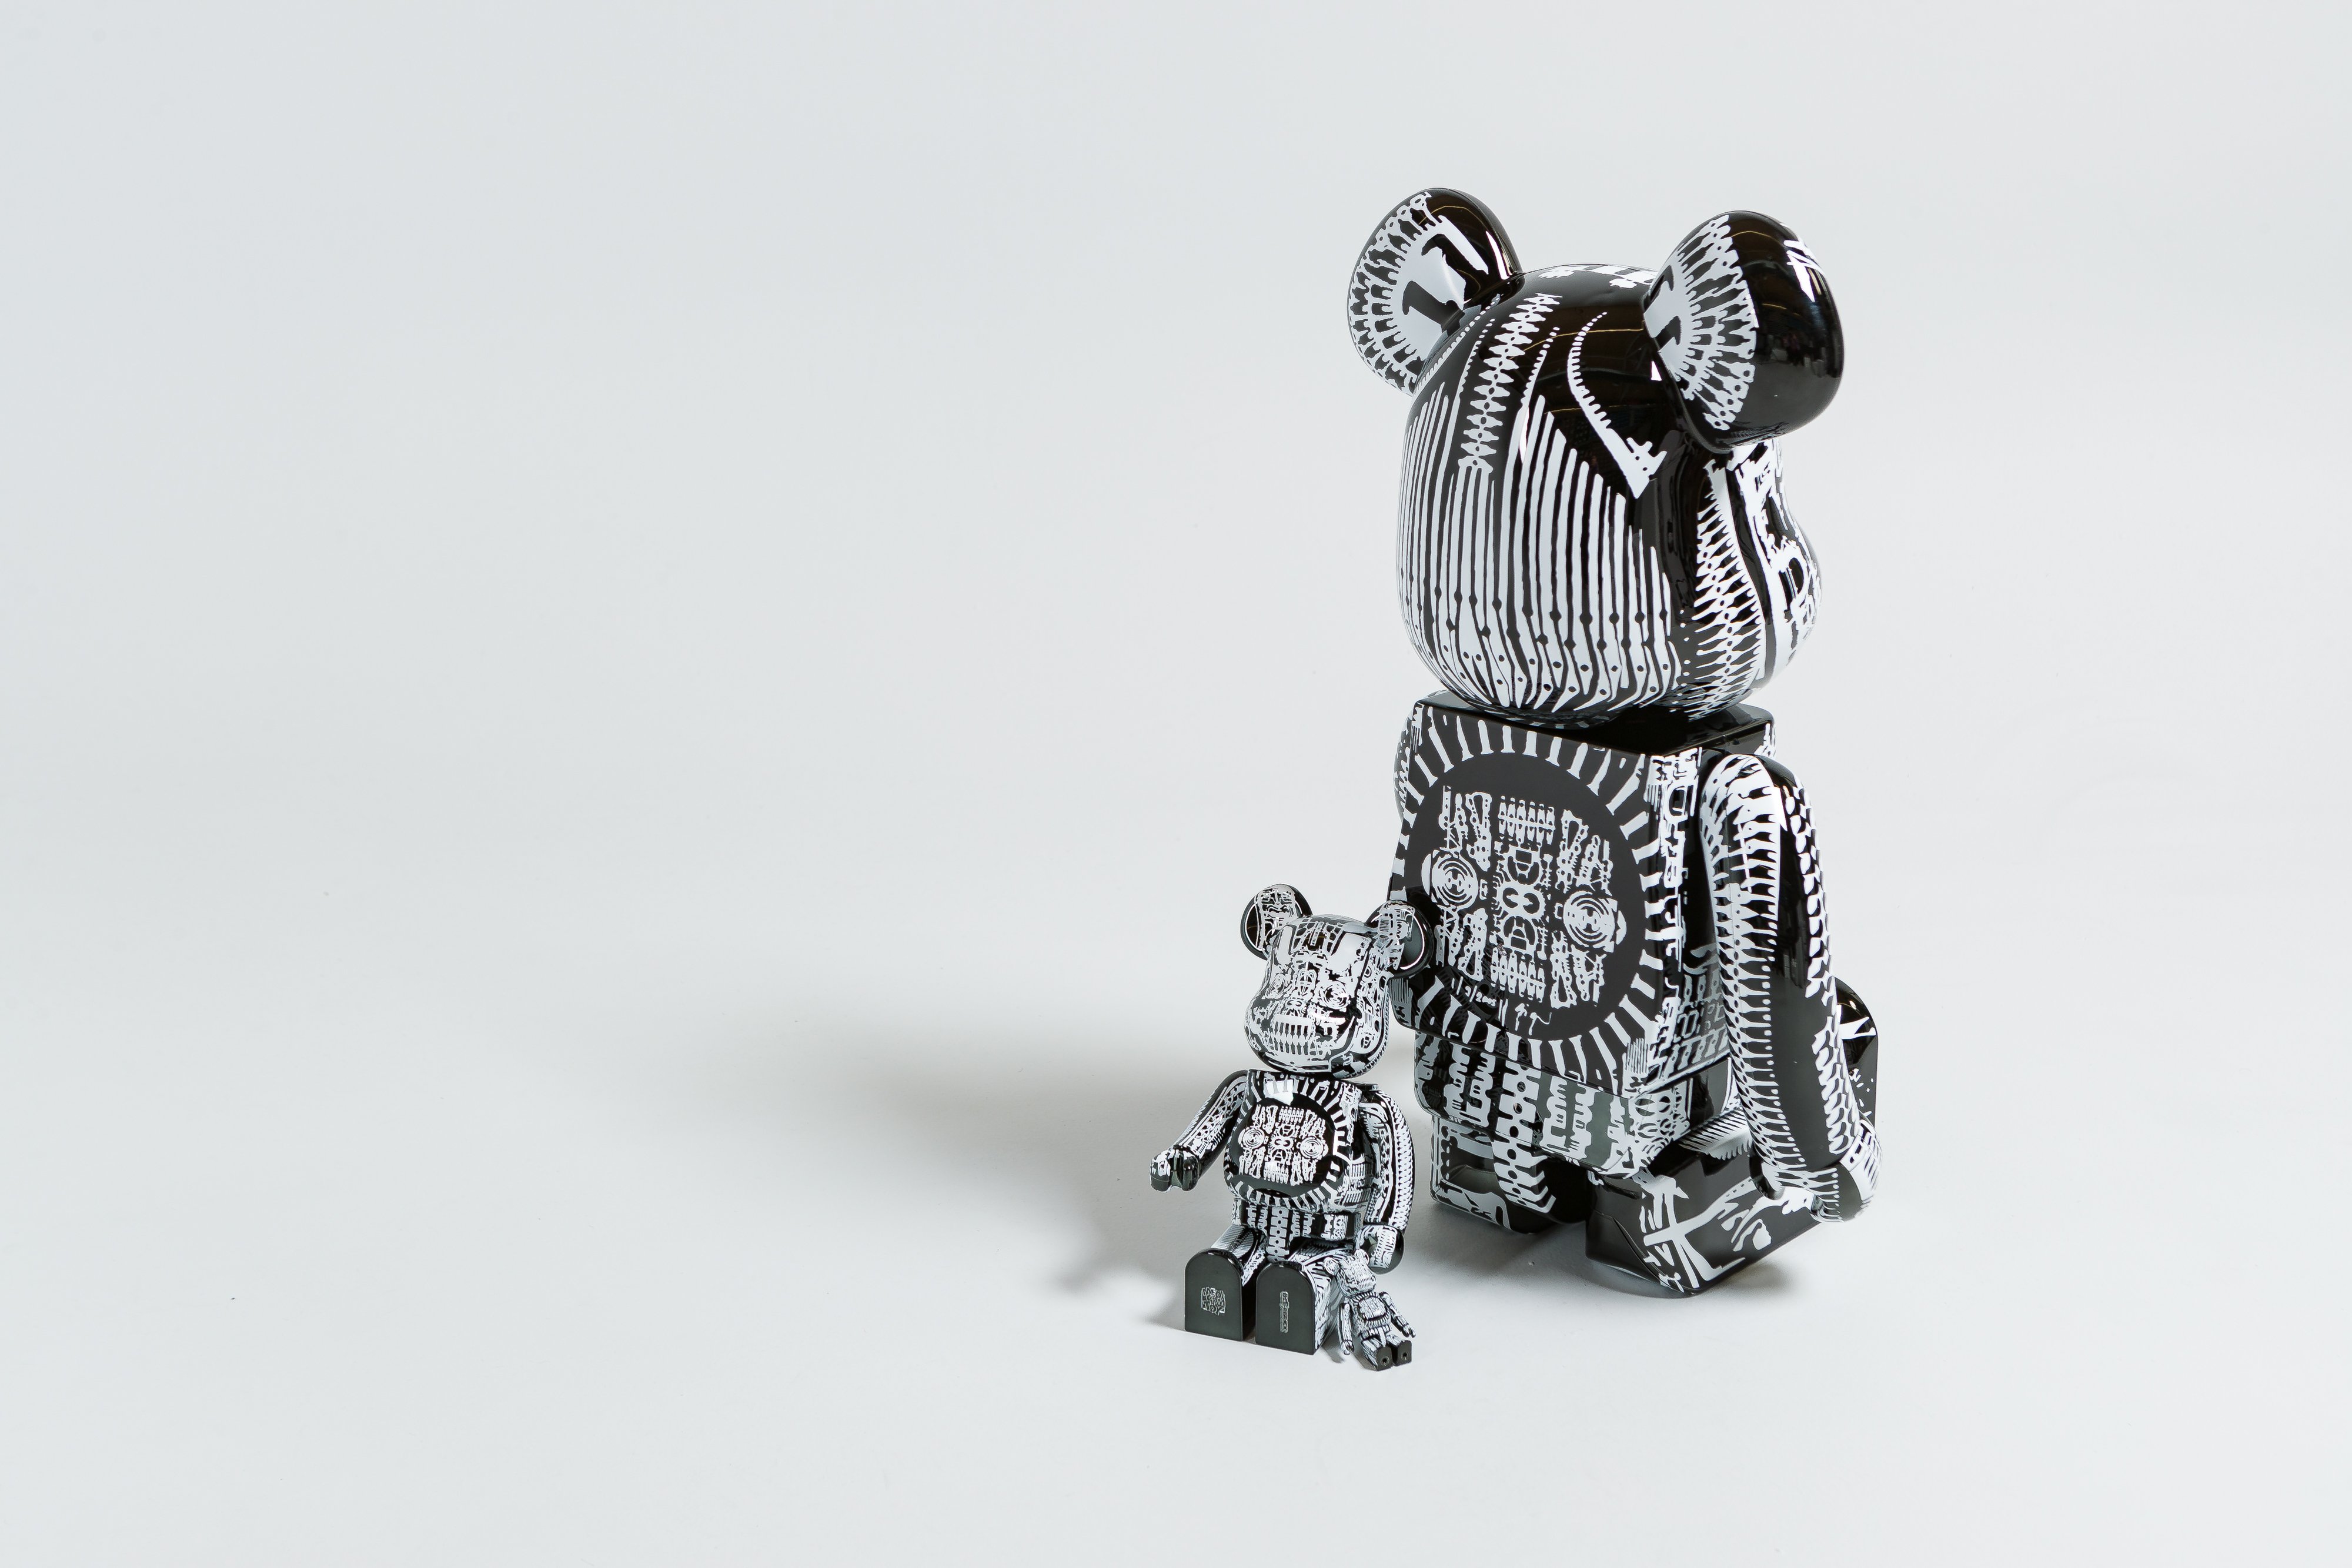 Up There Store - Medicom Toy - H.R. Giger Bearbrick & Keith Haring Statues